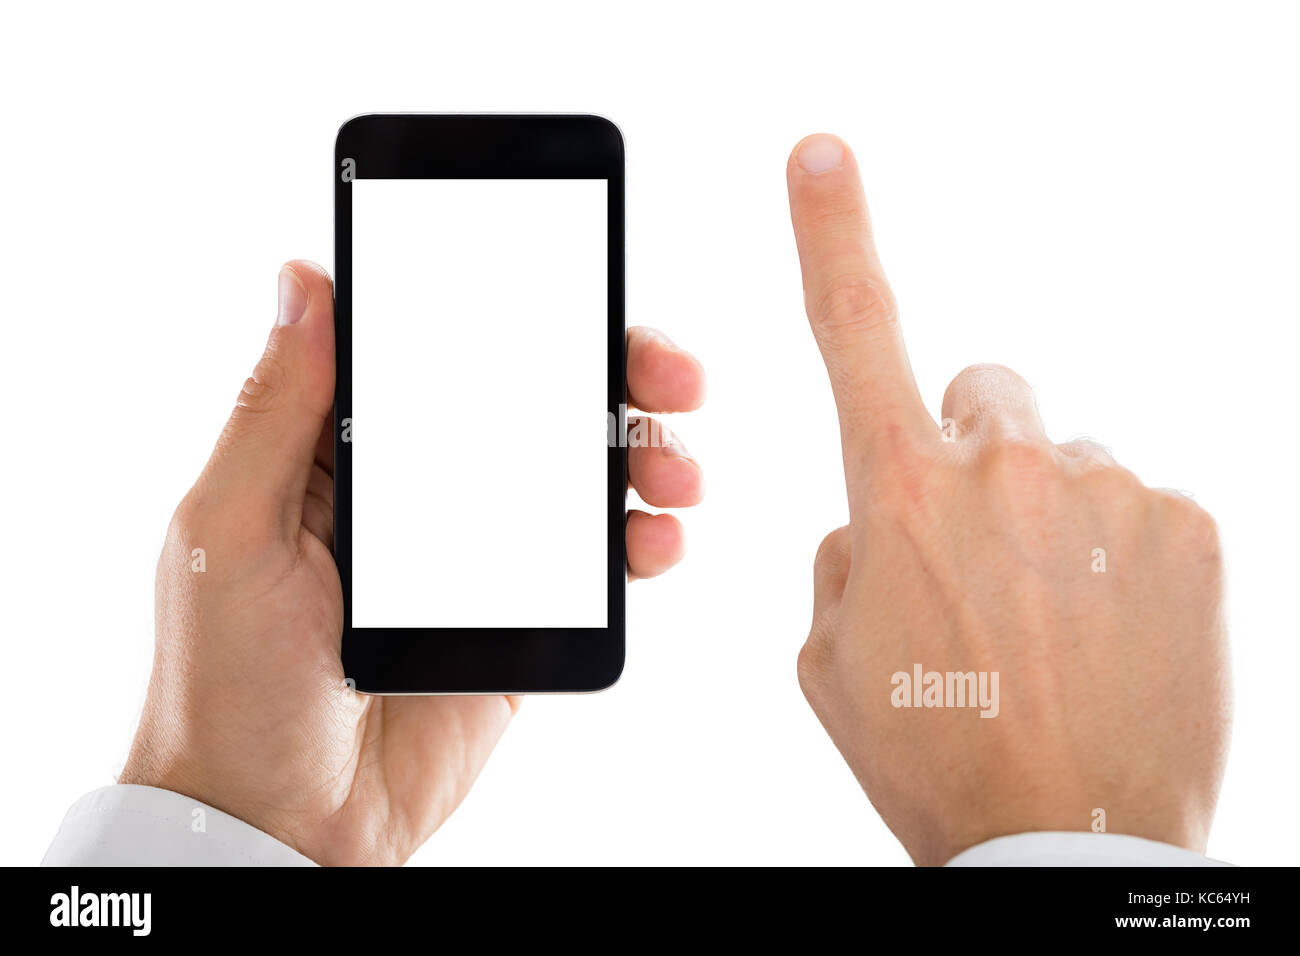 Close-up of man's hand holding mobile phone against white background Banque D'Images